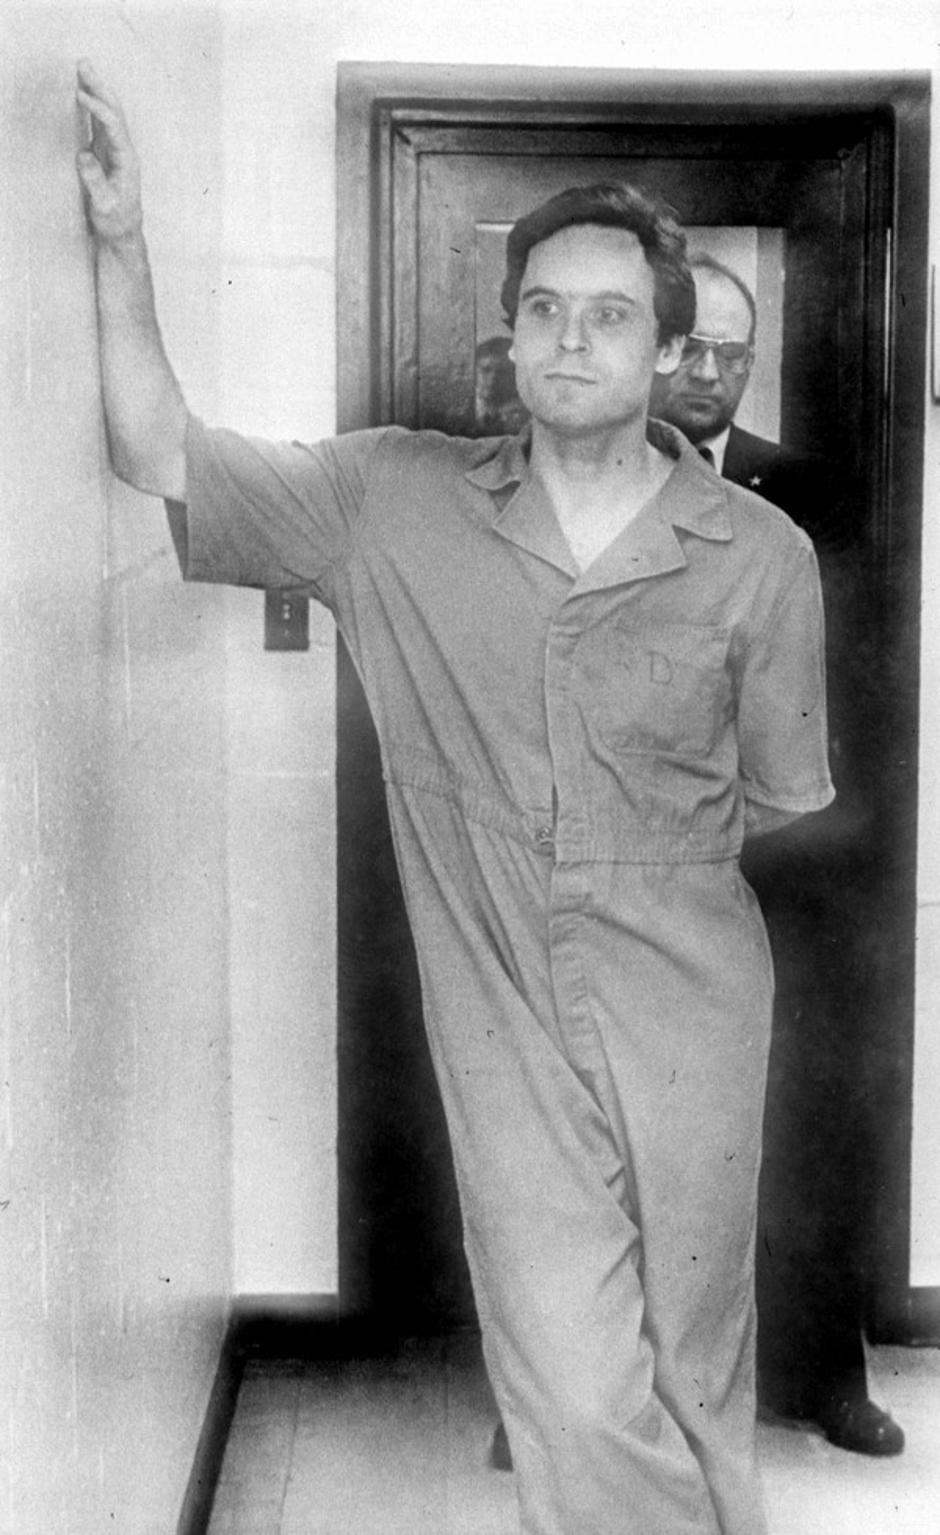 Ted Bundy | Author: State Archives of Florida, Florida Memory